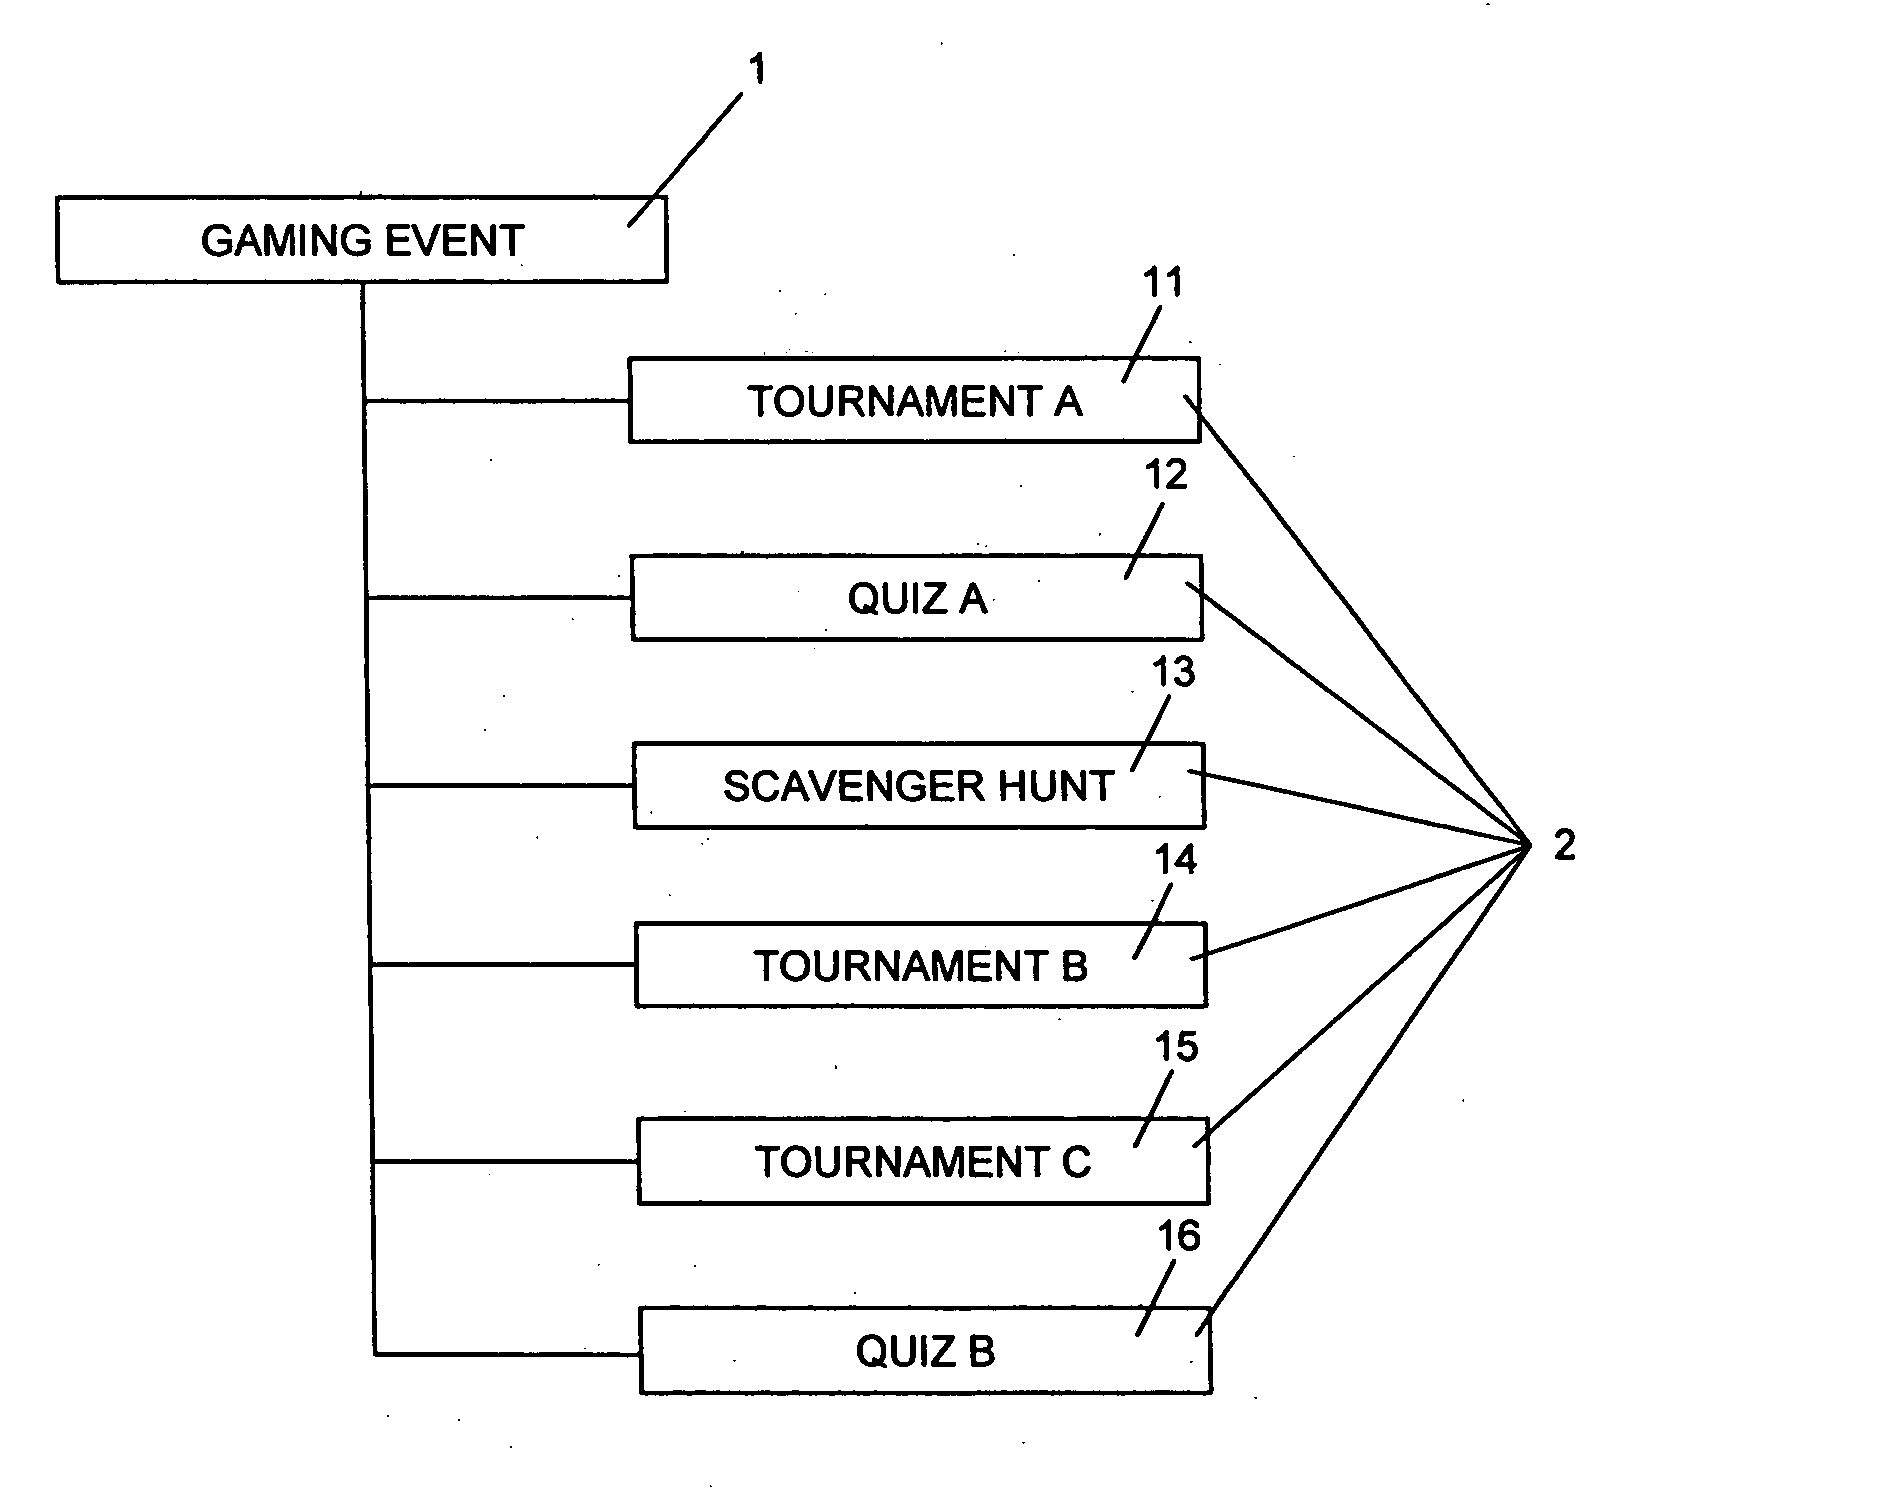 Gaming event management system